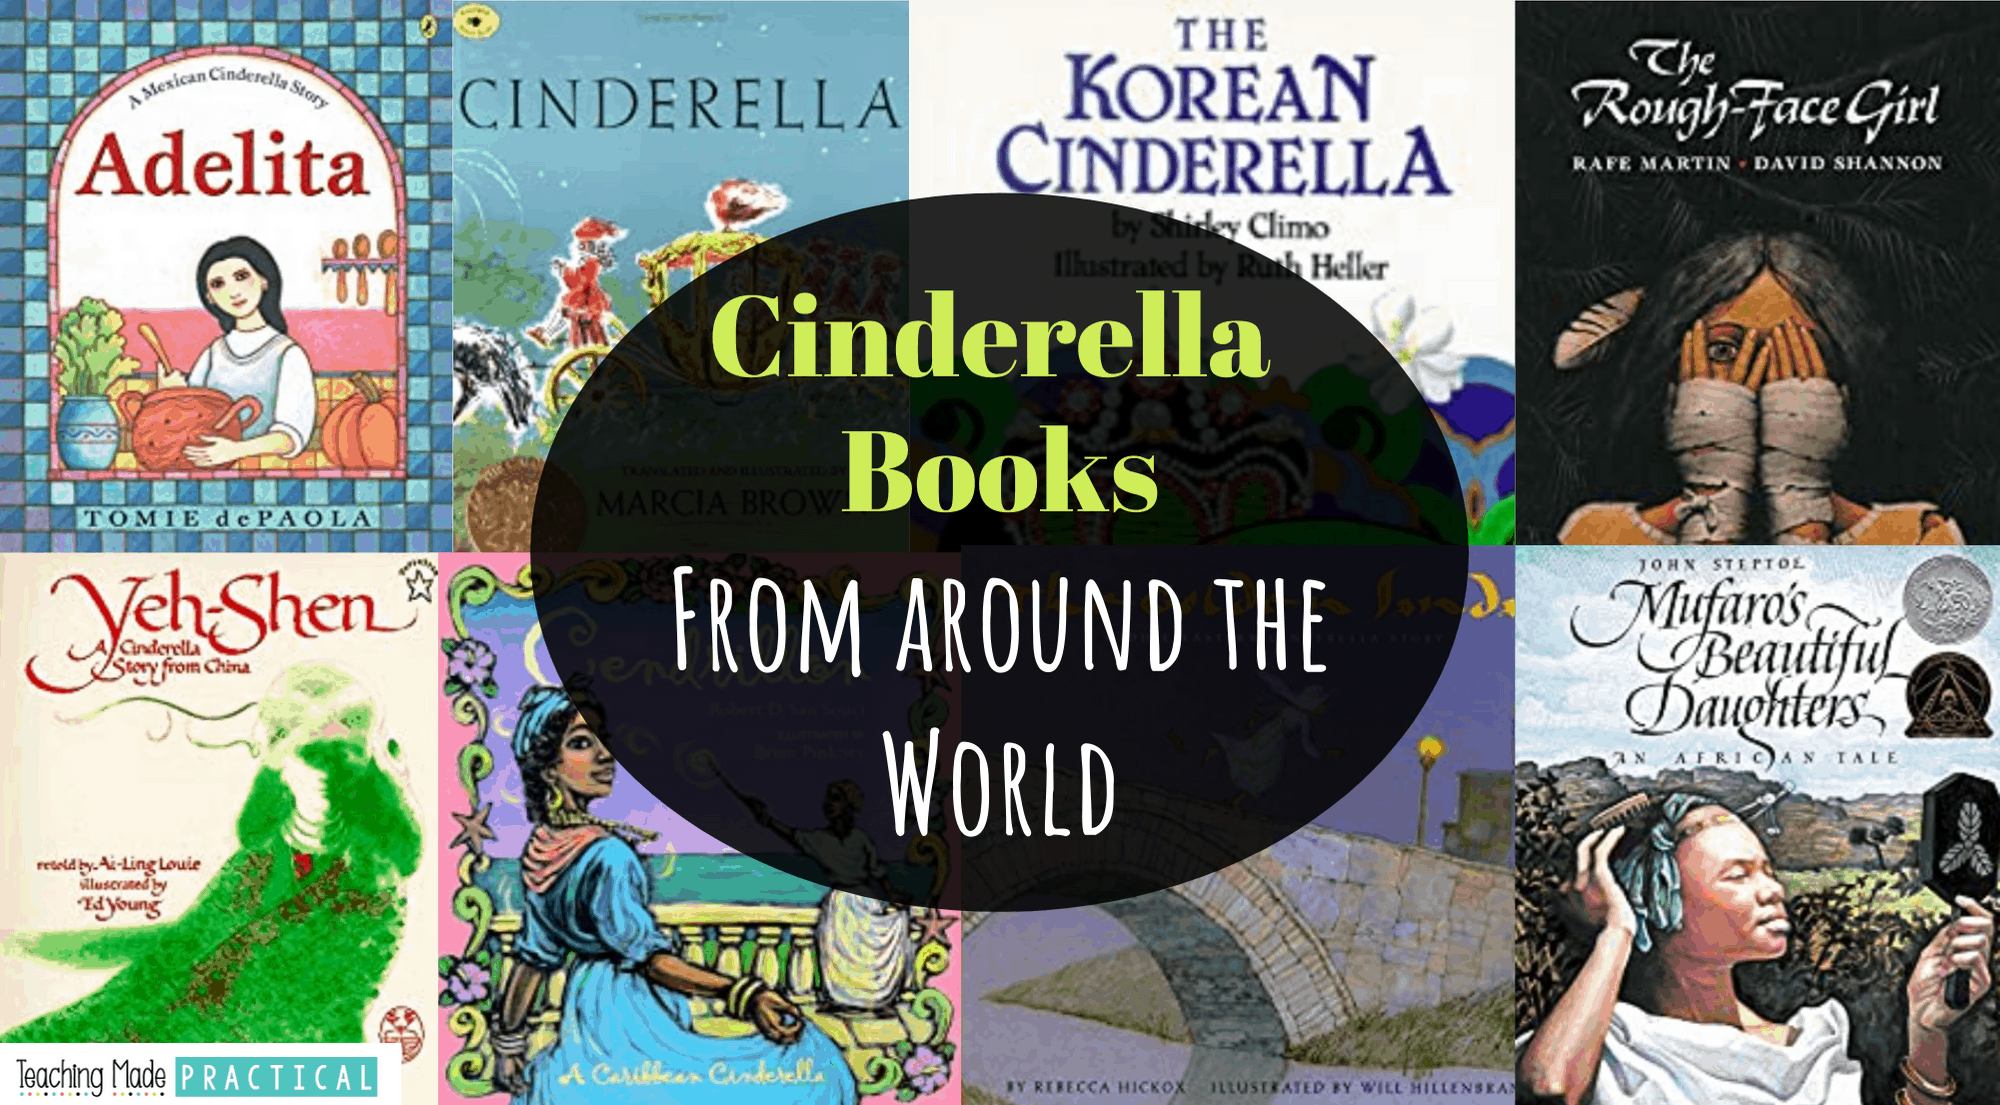 Use these different versions of Cinderella books from around the world in a unit for 3rd, 4th, or 5th grade students